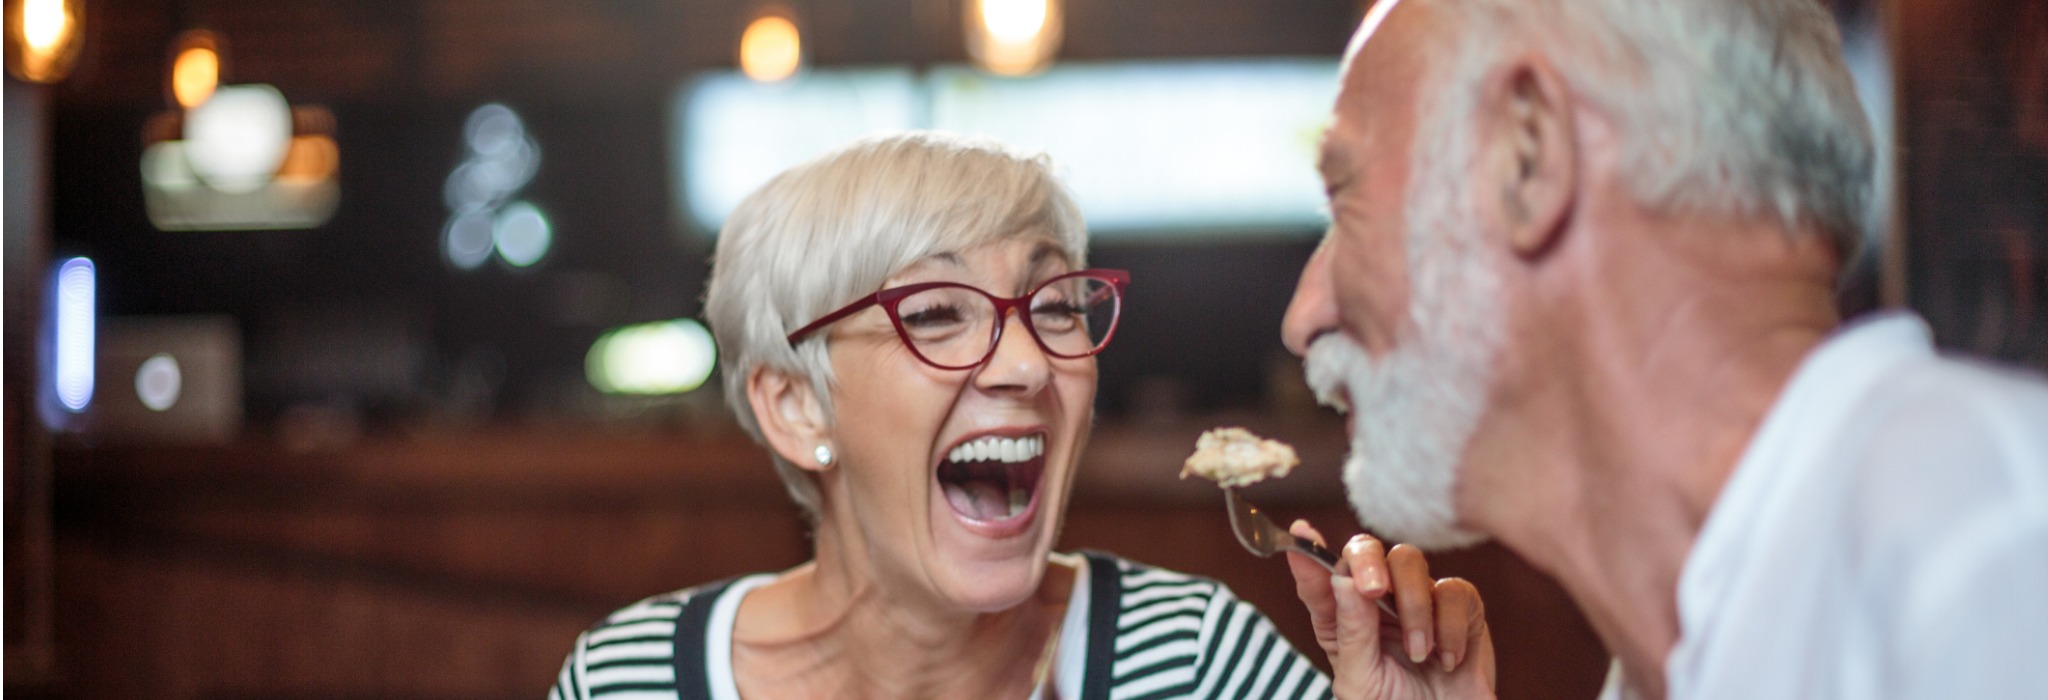 senior-woman-laughing-while-feeding-her-male-partner-in-the-picture-2048x700jpg.jpg